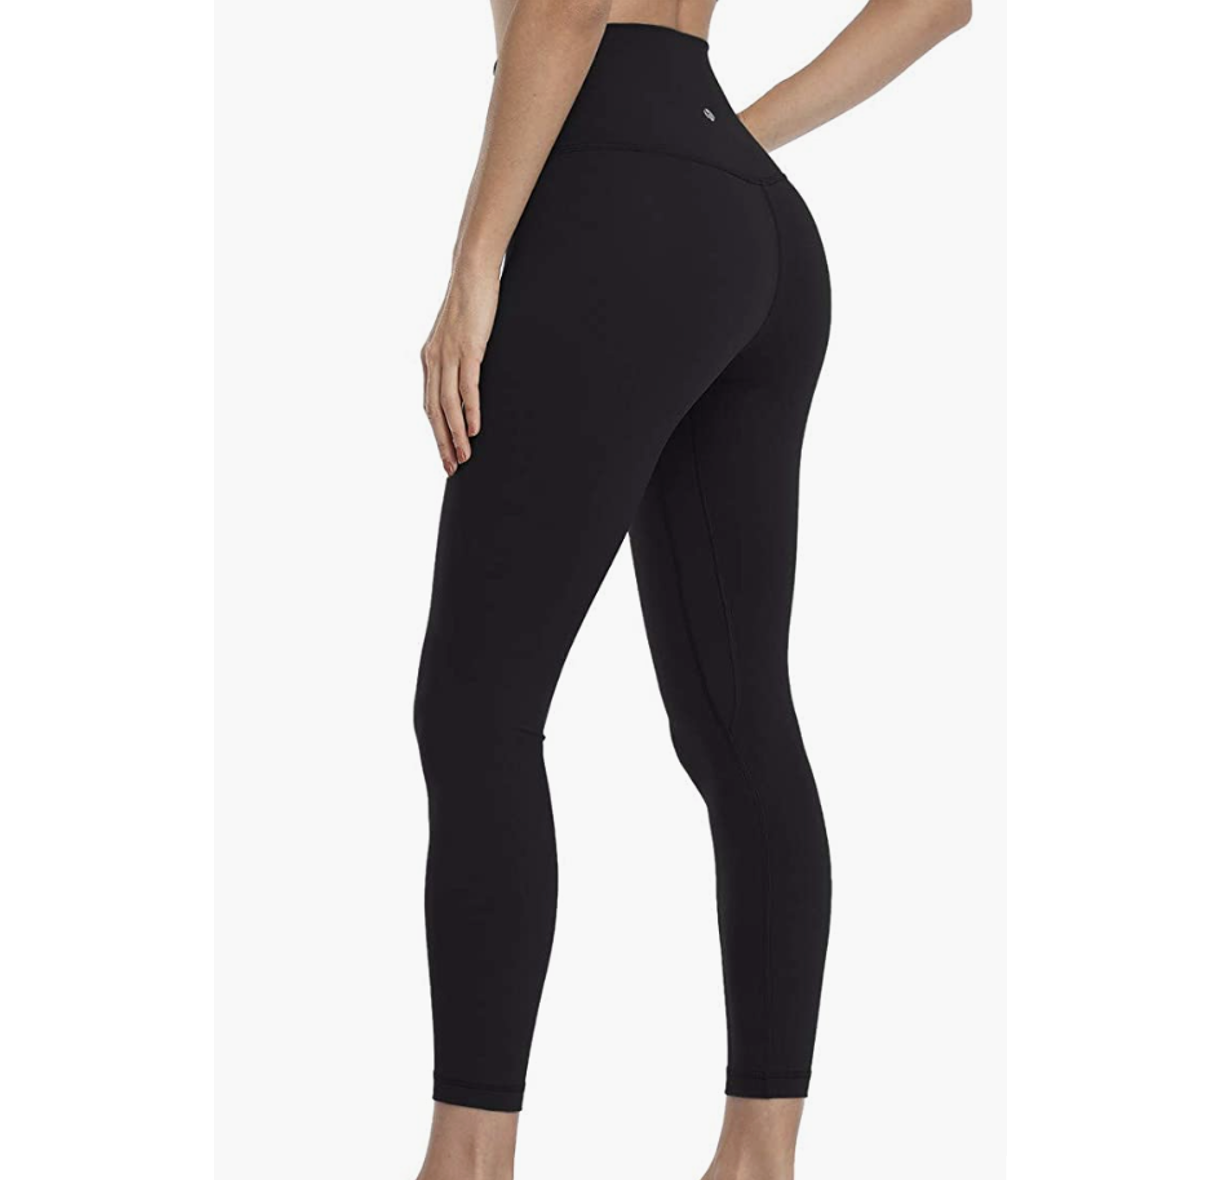 Amazon Brand - Symactive Women Leggings - THE DEAL APP | Get Best Deals,  Discounts, Offers, Coupons for Shopping in India